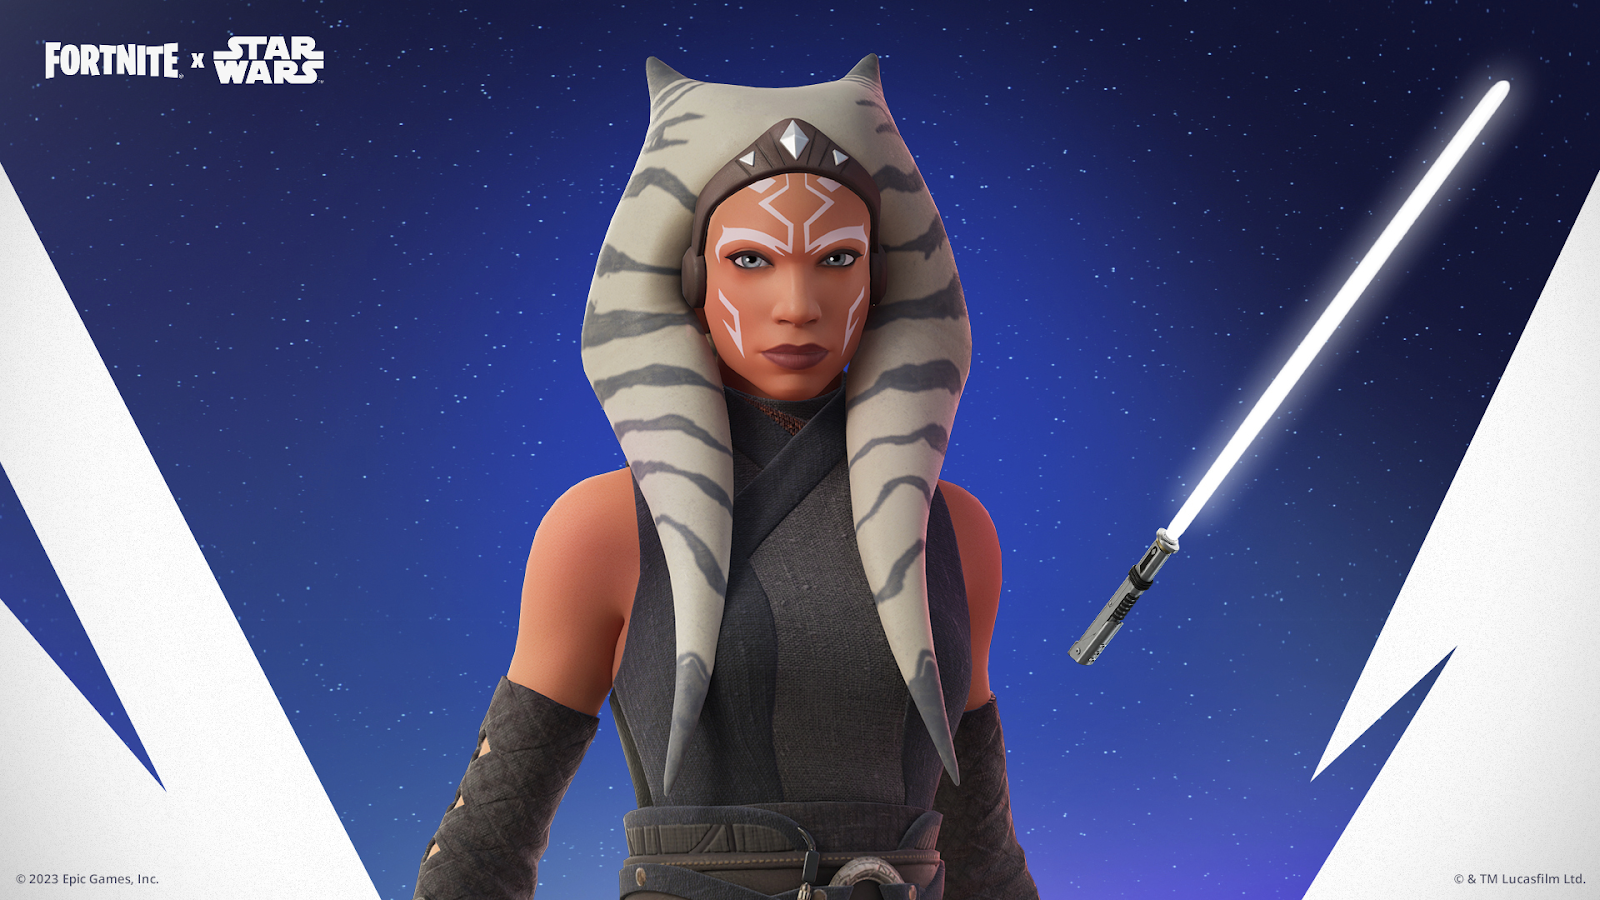 Celebrate STAR WARS™ with The Epic Games Store and Fortnite! - Epic Games  Store